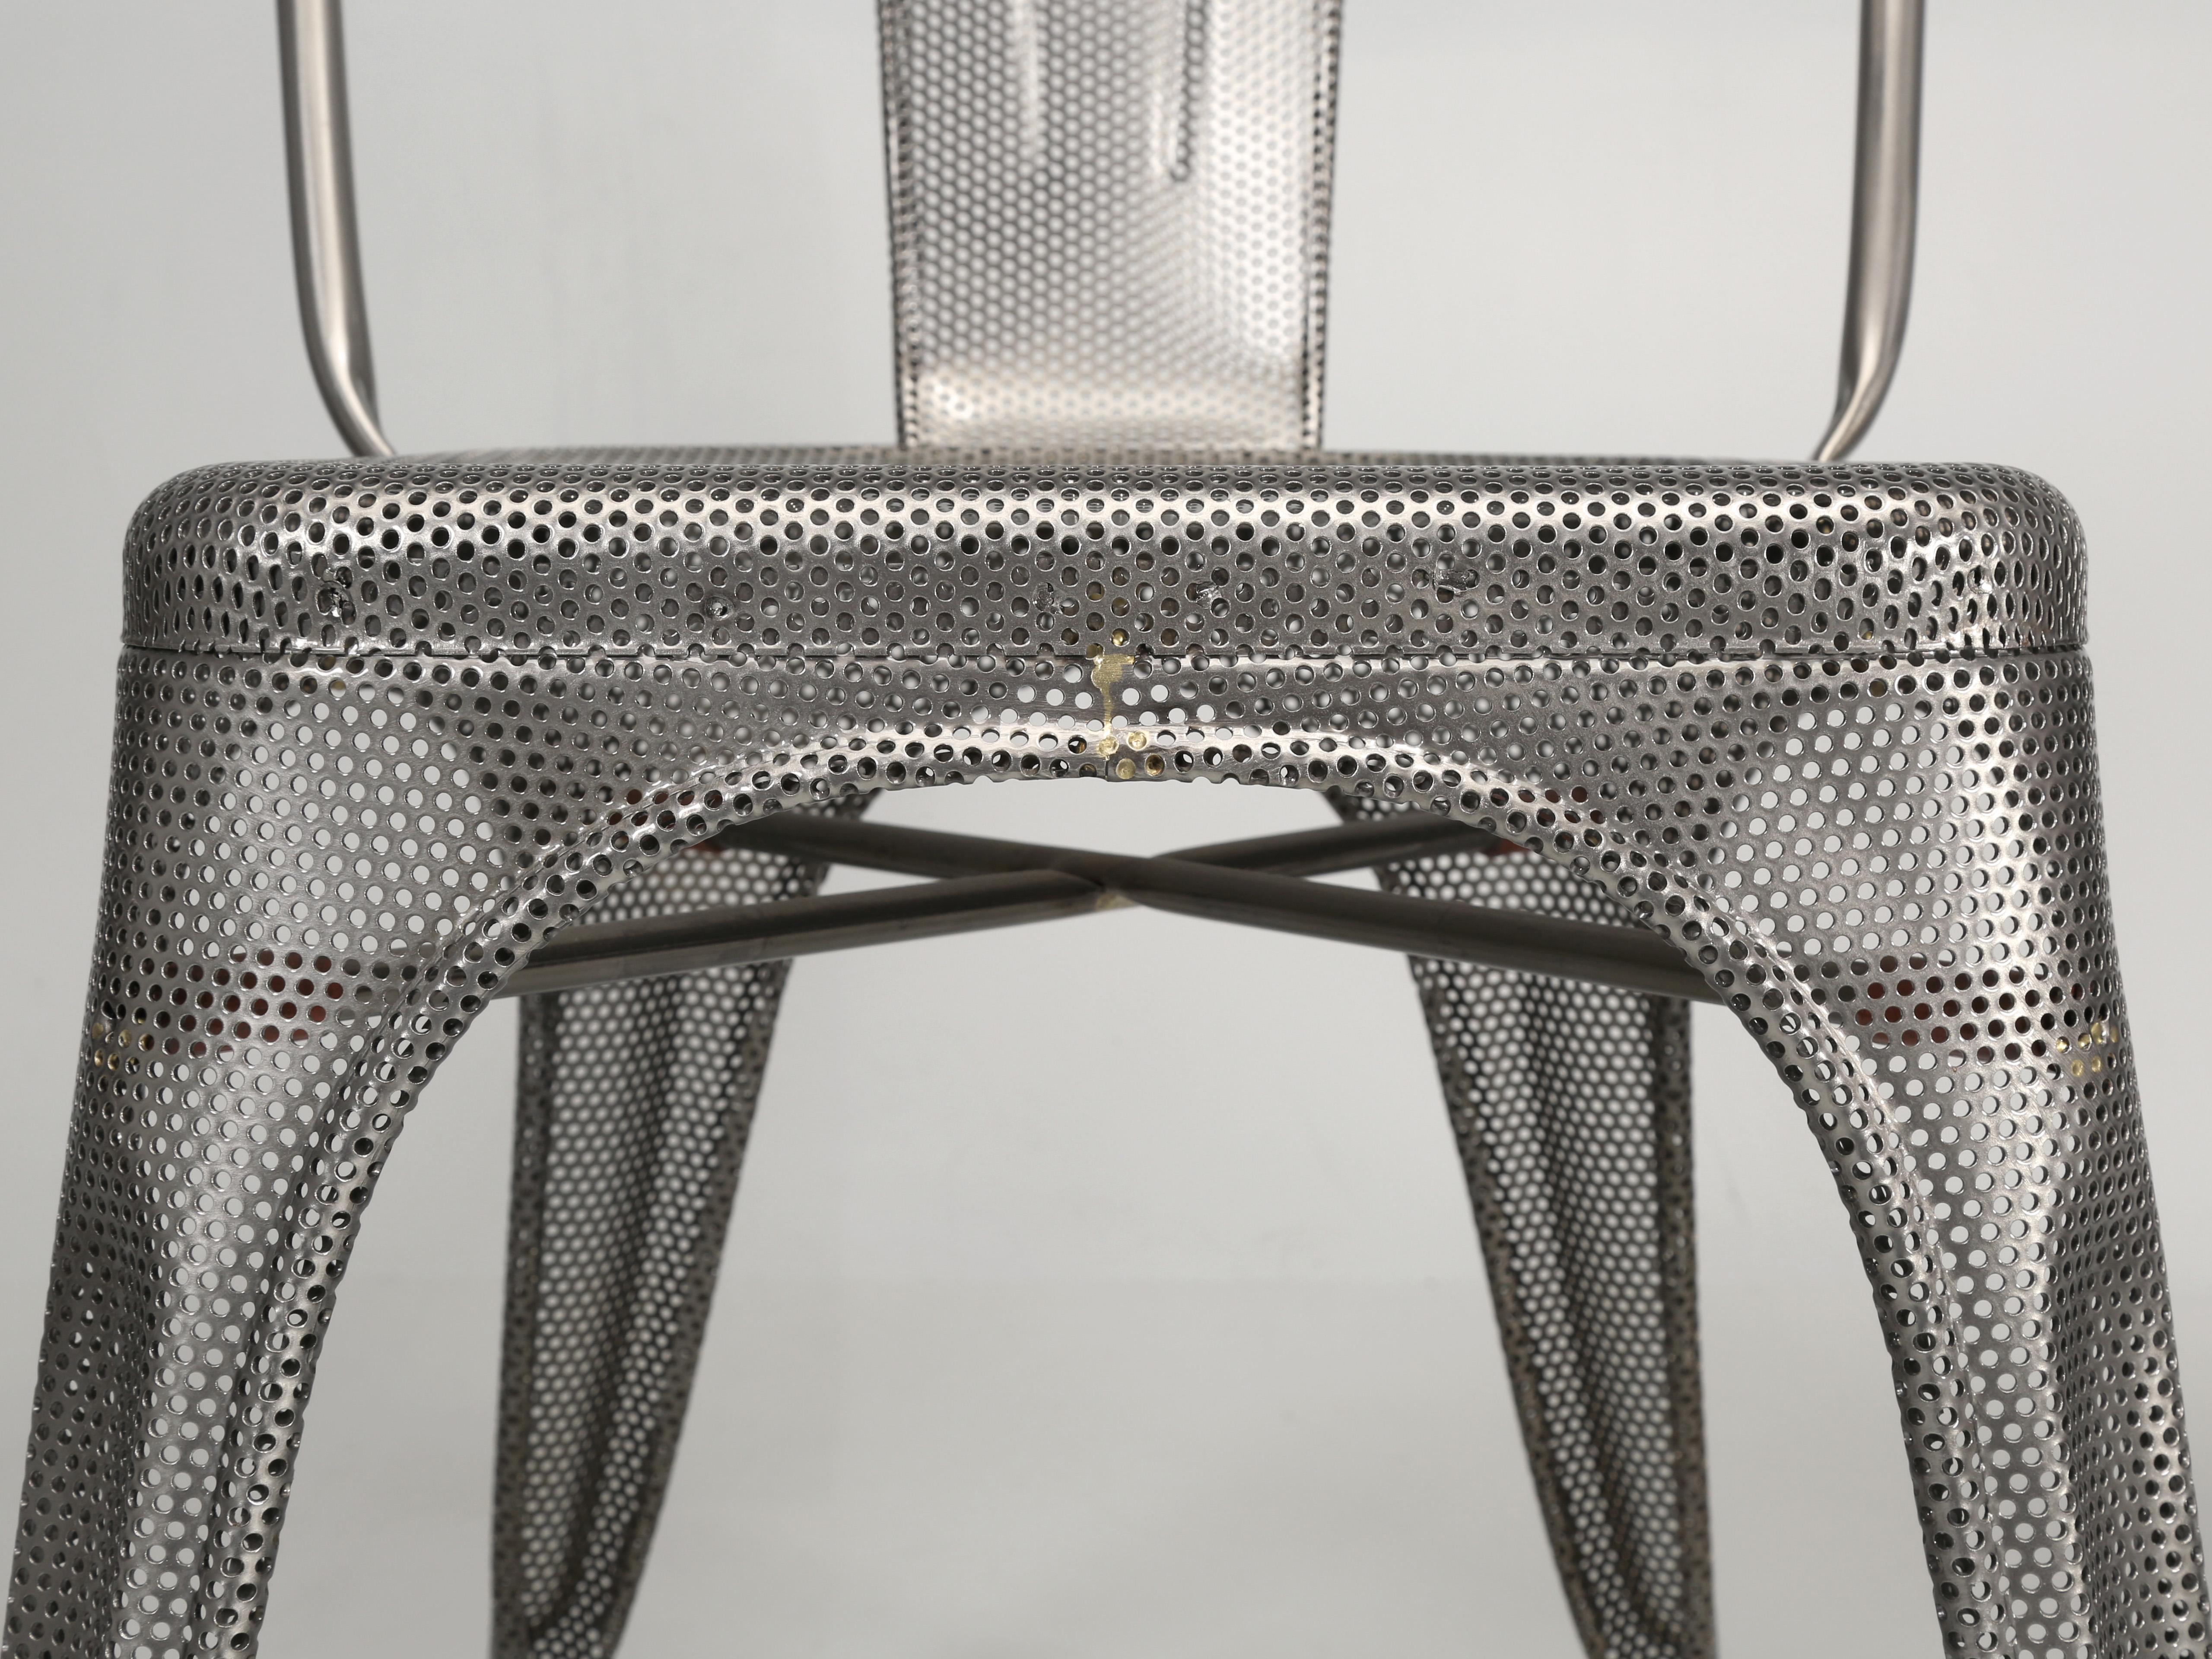 New Tolix Wire Mesh Chairs Set '4' Showroom Samples 1500 Tolix Pieces Available 3